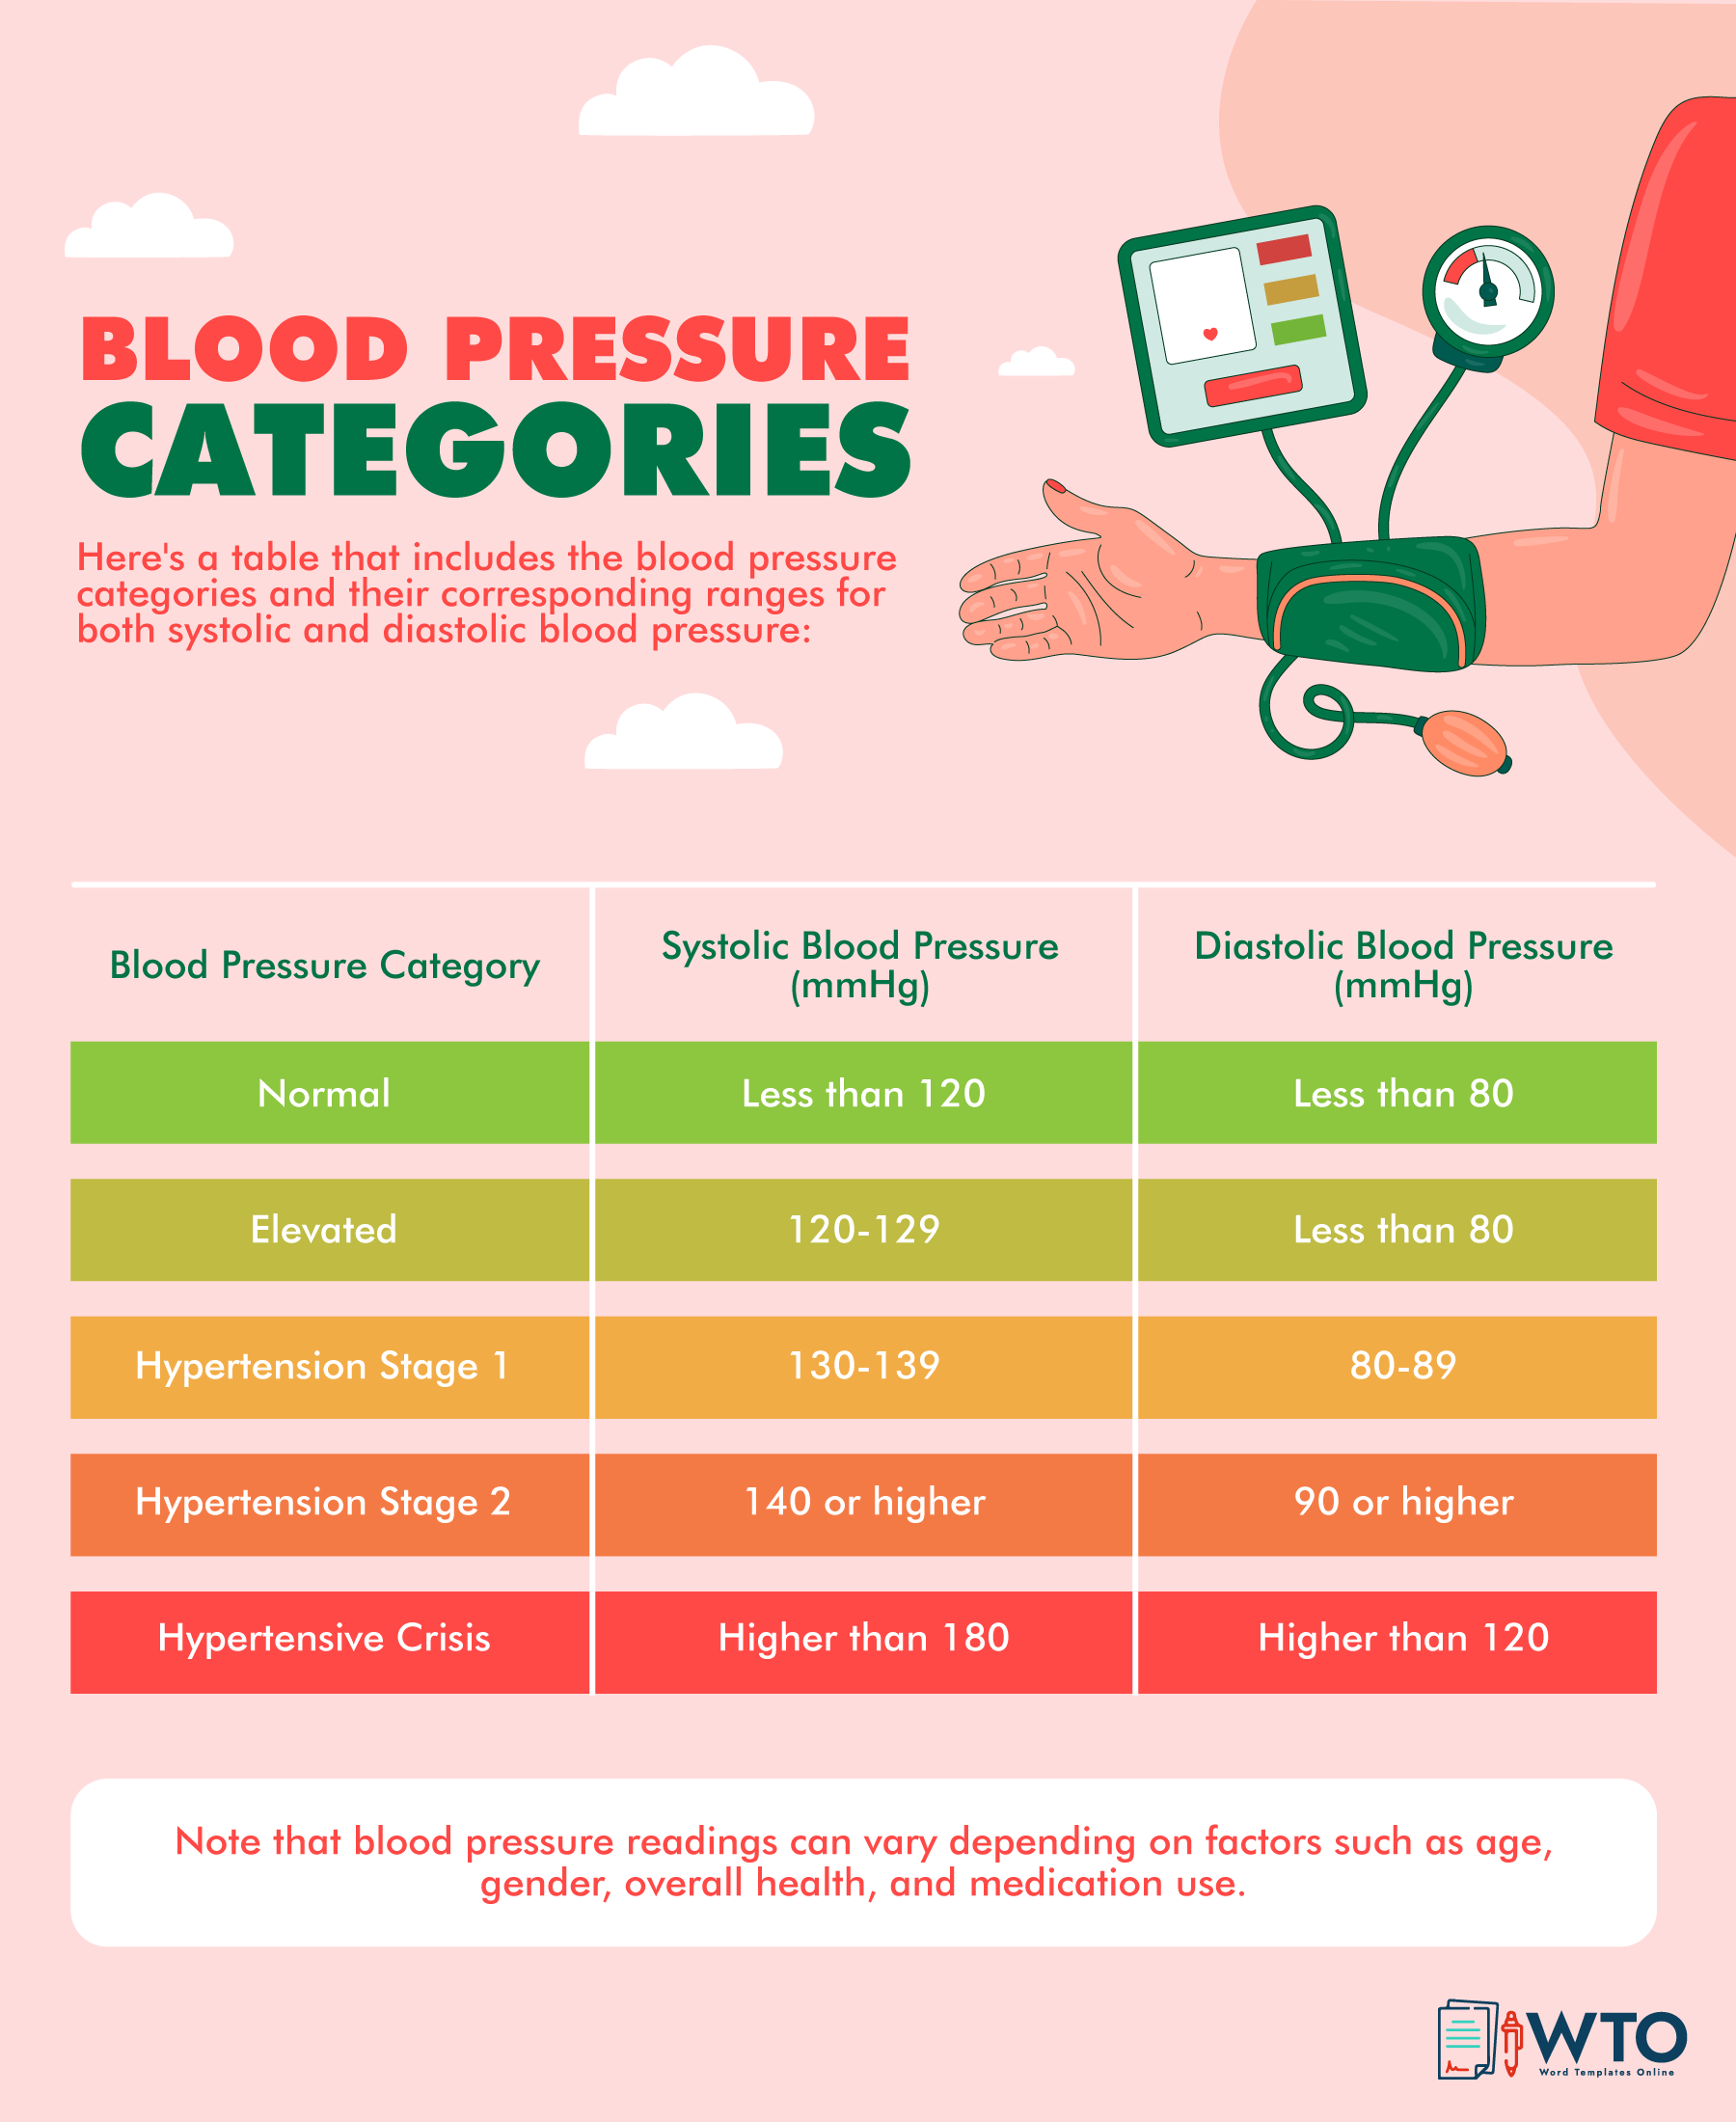 This infographic is about various categories of blood pressure.